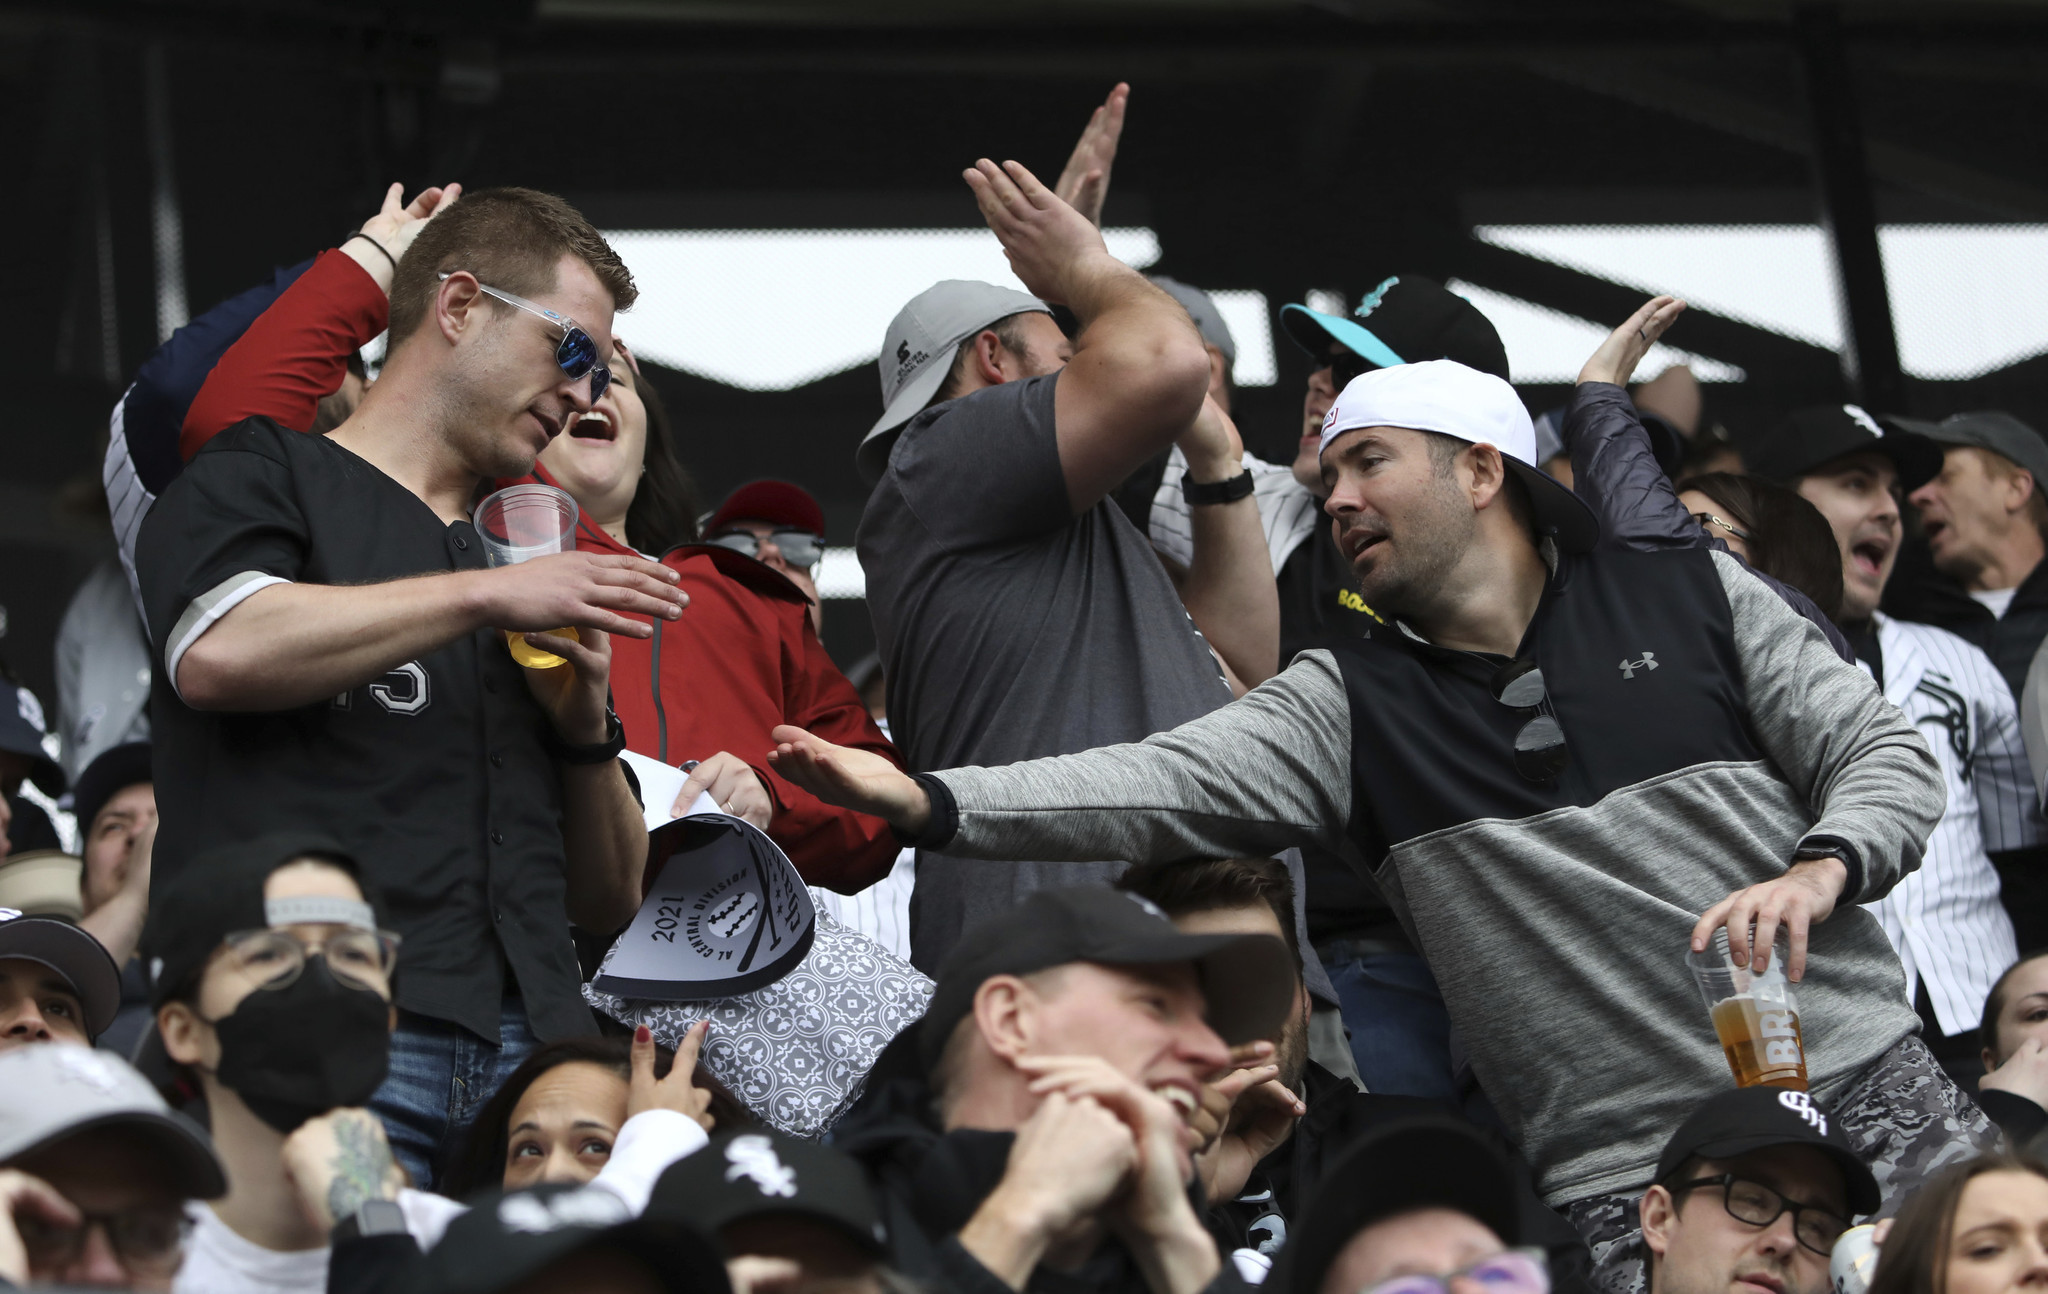 Column: Buzz builds for Chicago White Sox fans in home opener